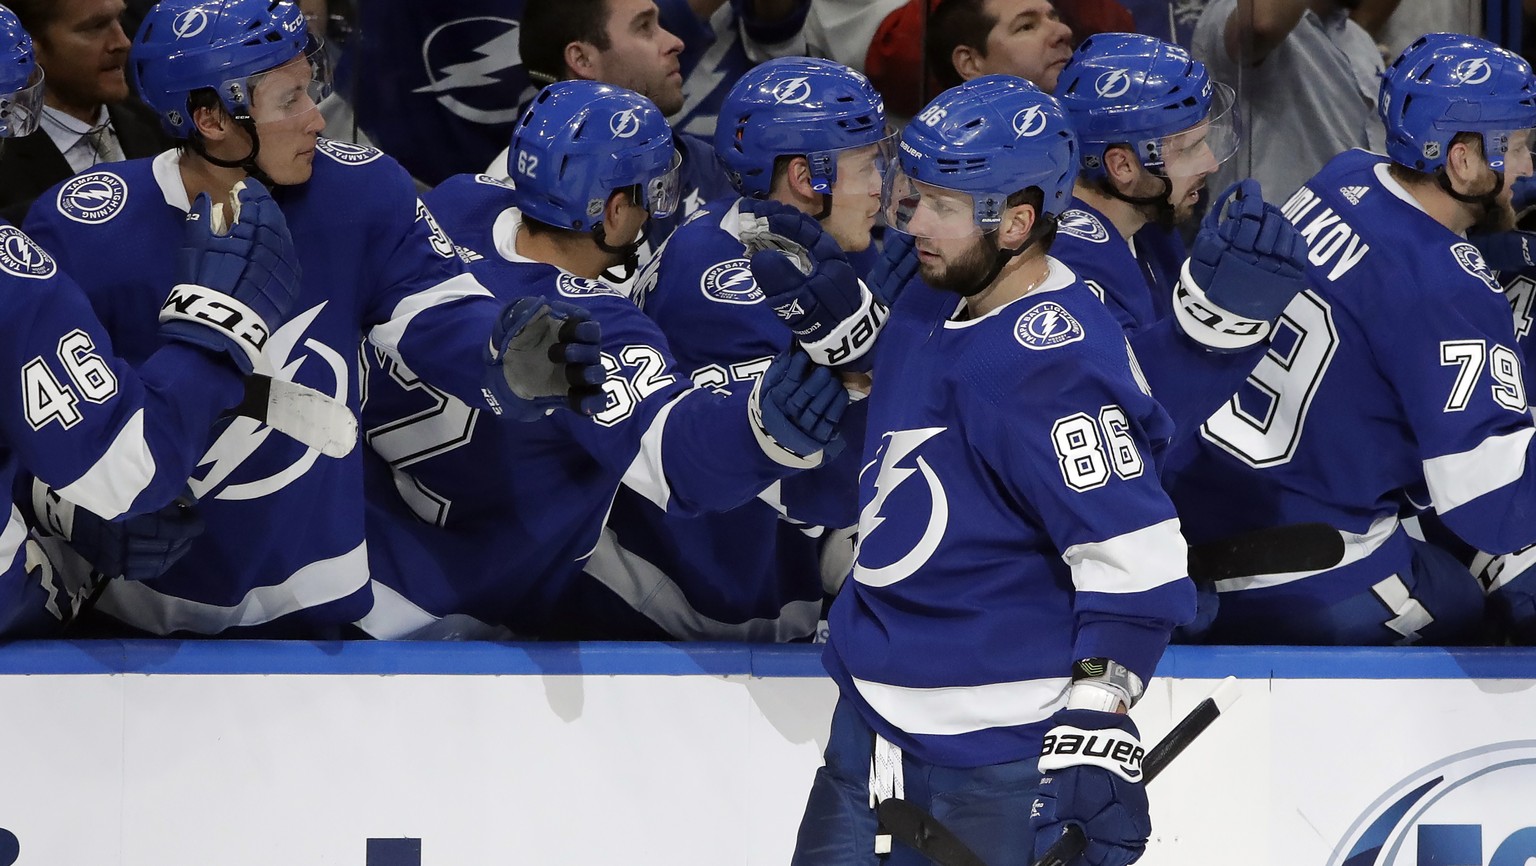 Tampa Bay Lightning right wing Nikita Kucherov (86) celebrates with the bench after scoring against the Nashville Predators during the third period of an NHL preseason hockey game Friday, Sept. 20, 20 ...